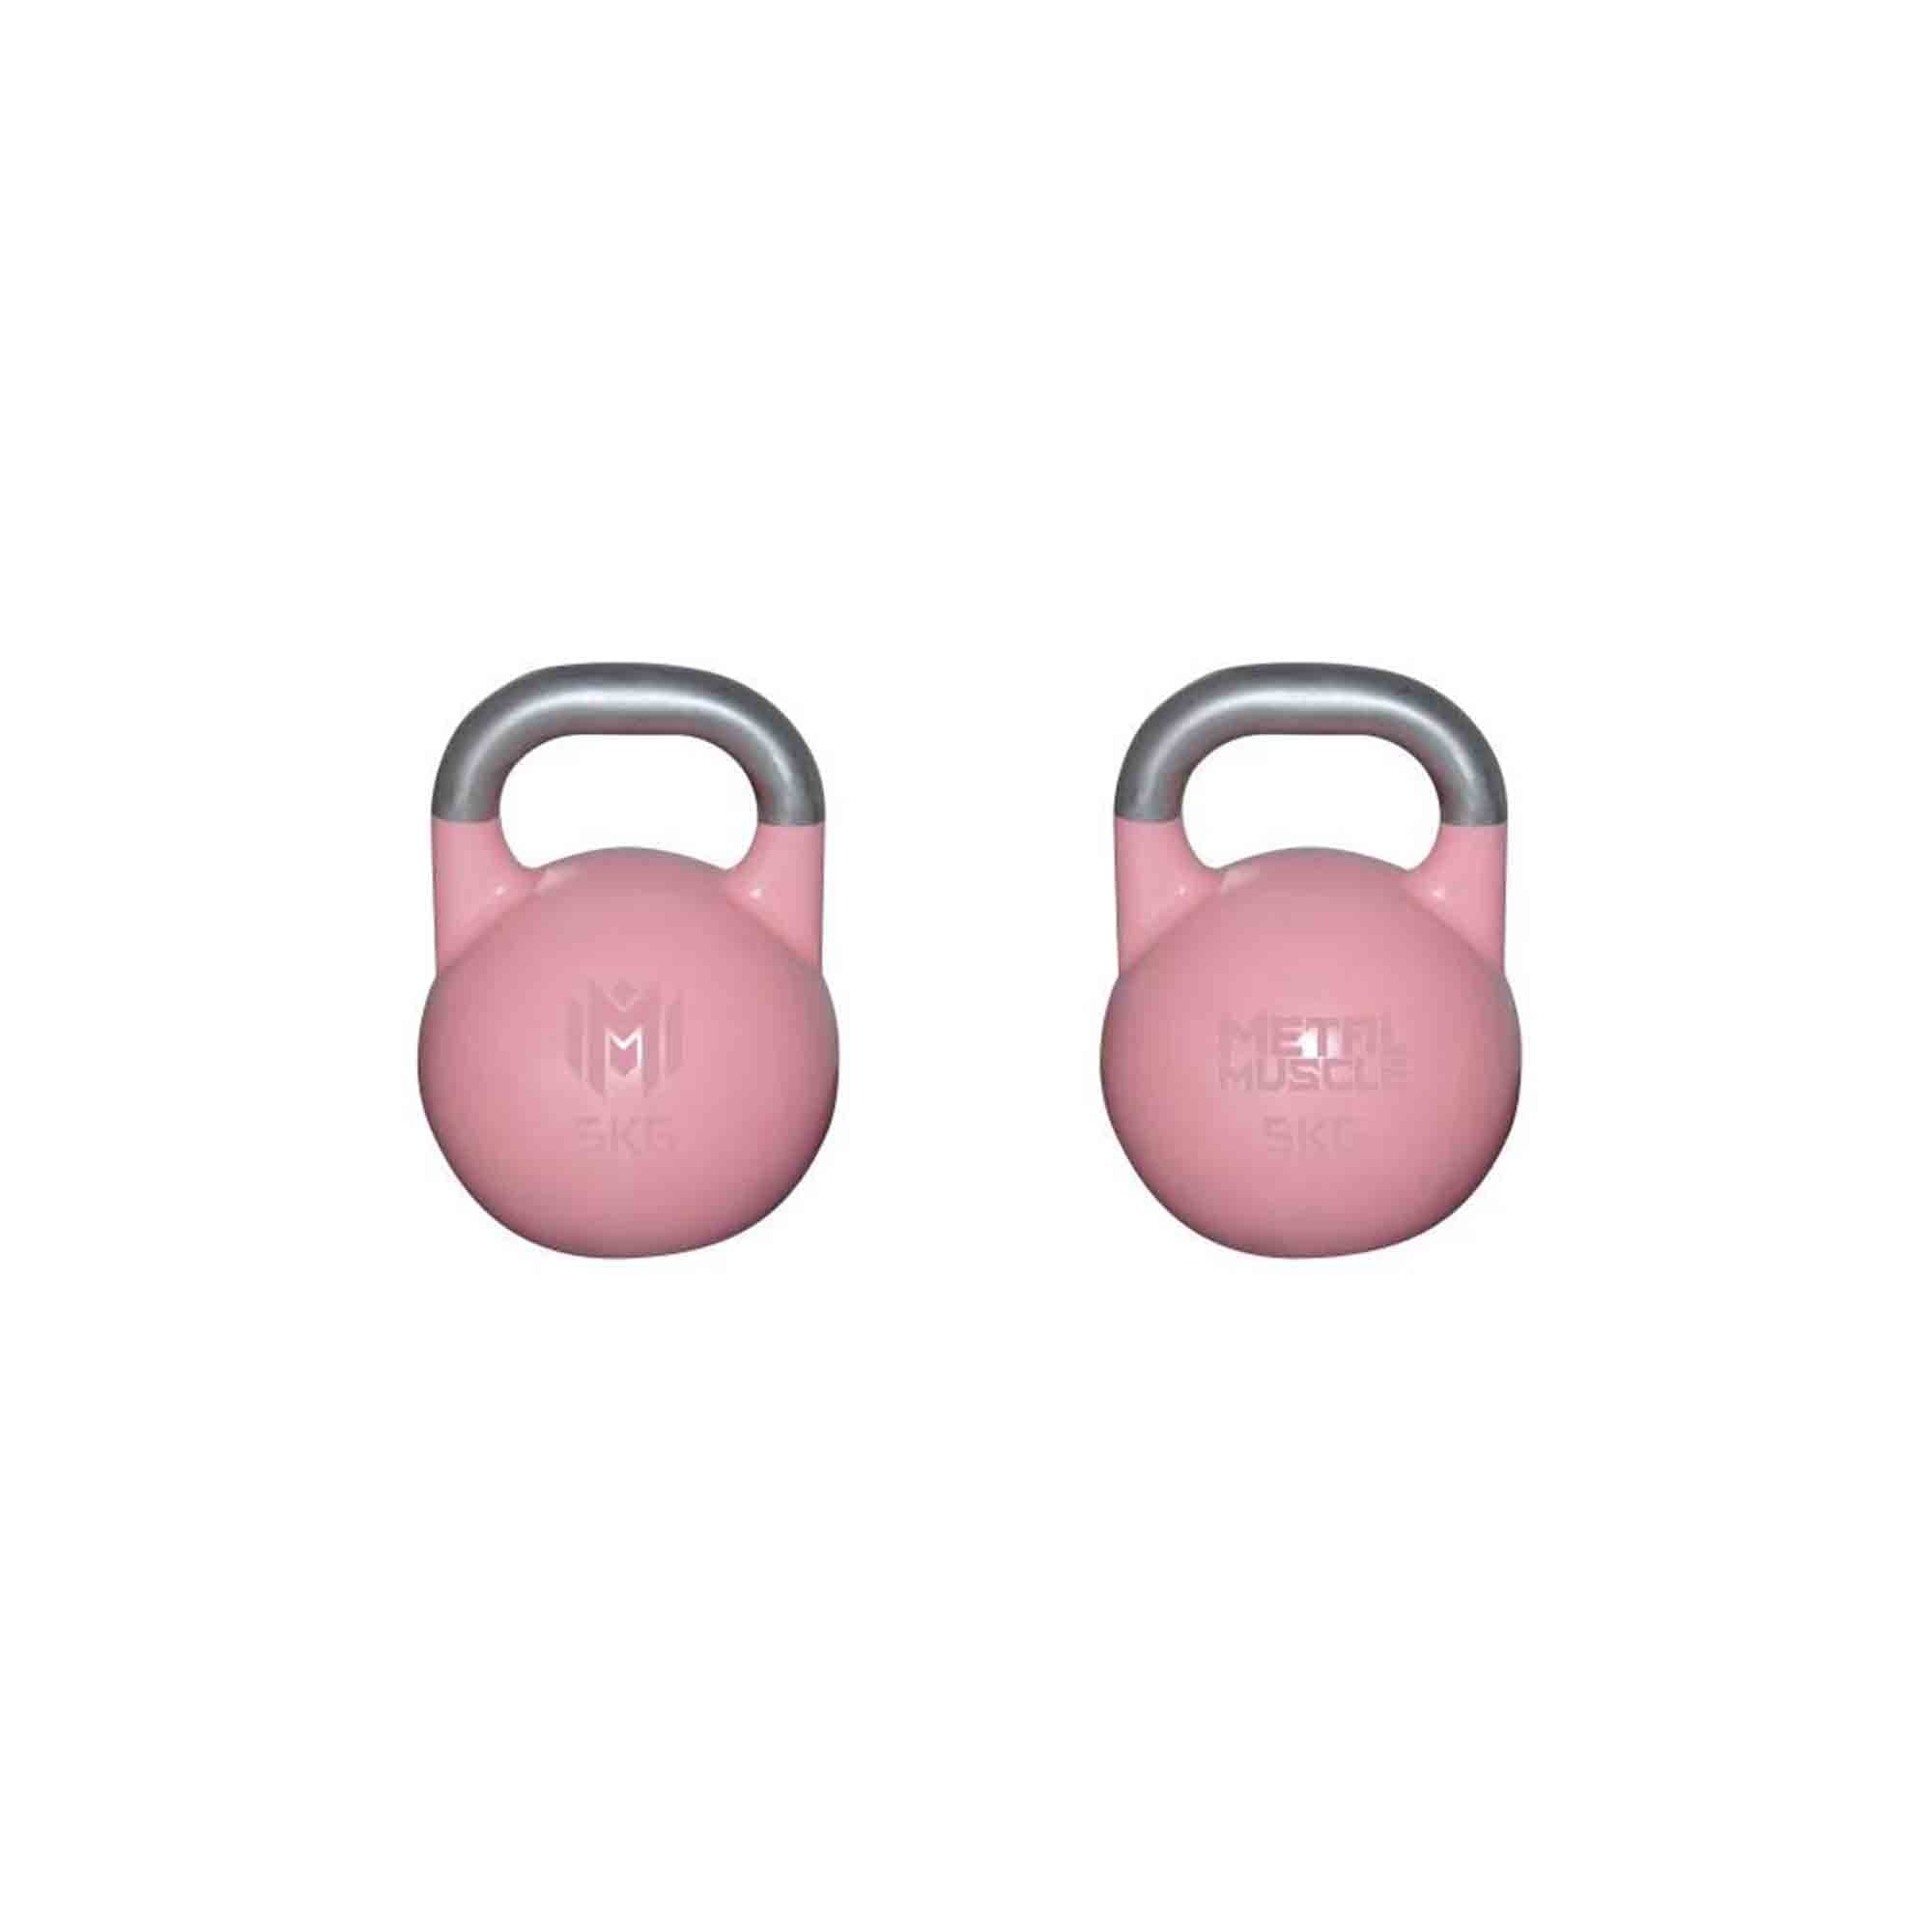 Kettlebell Competition grade – THRV ATHLETIC